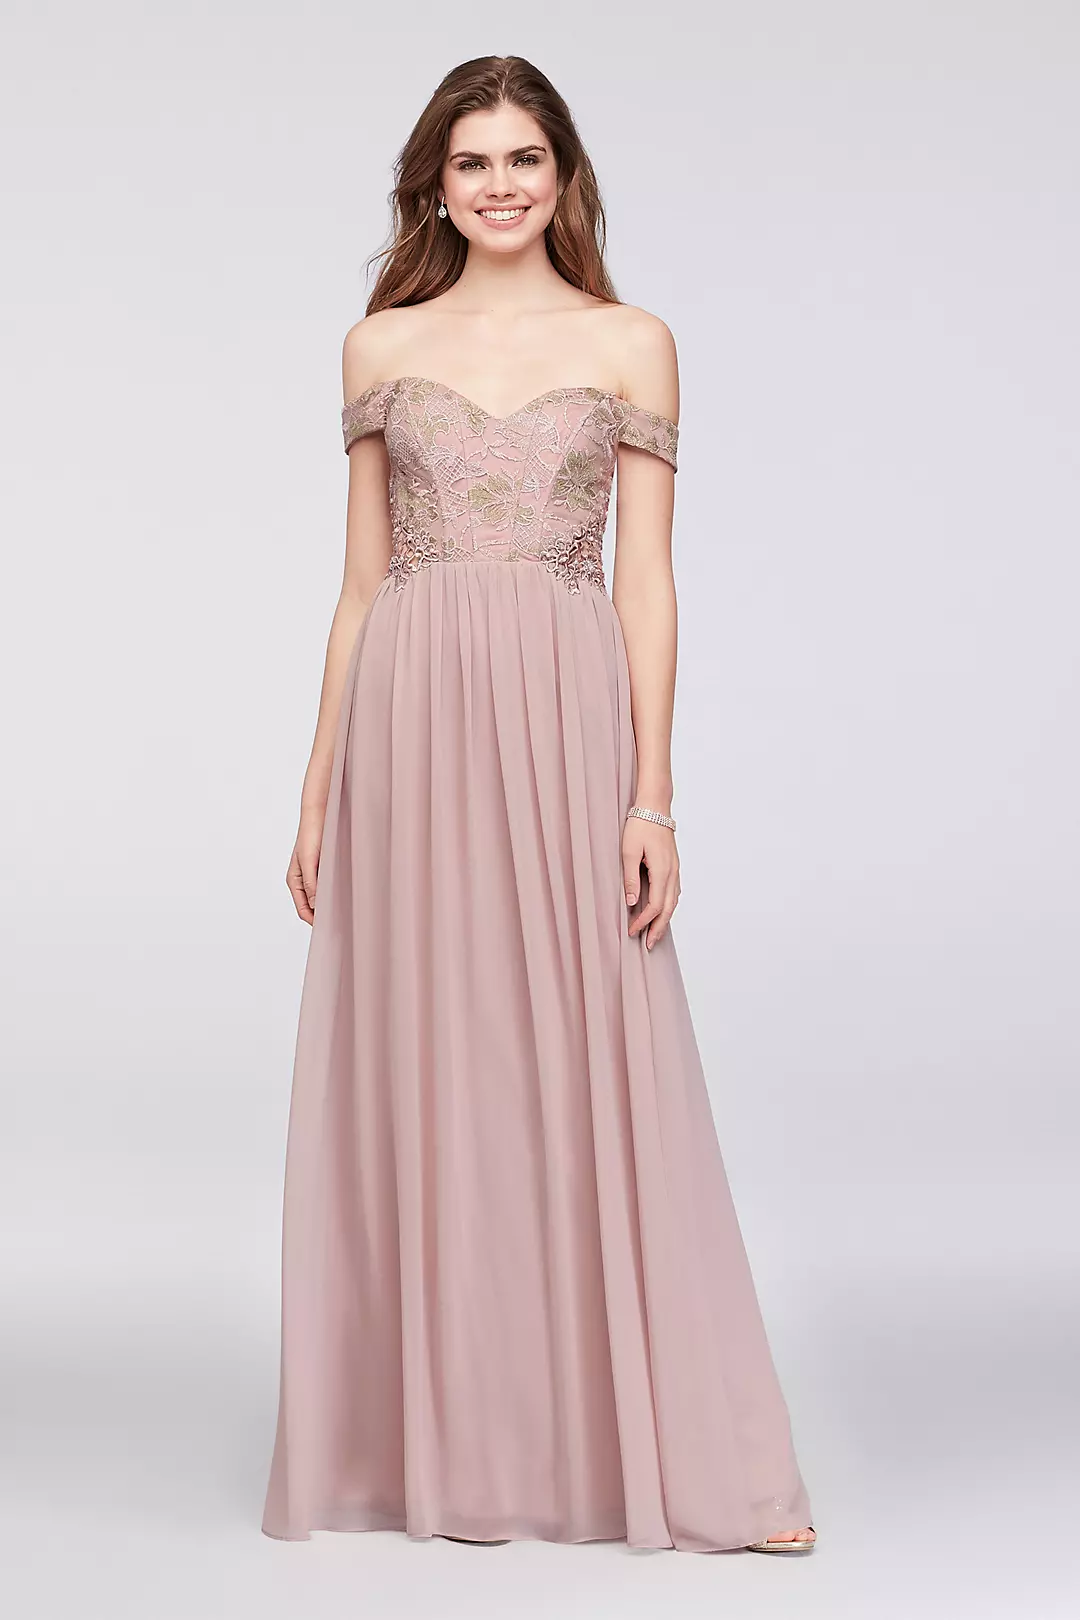 Off-the-Shoulder Lace and Chiffon Corset Gown Image